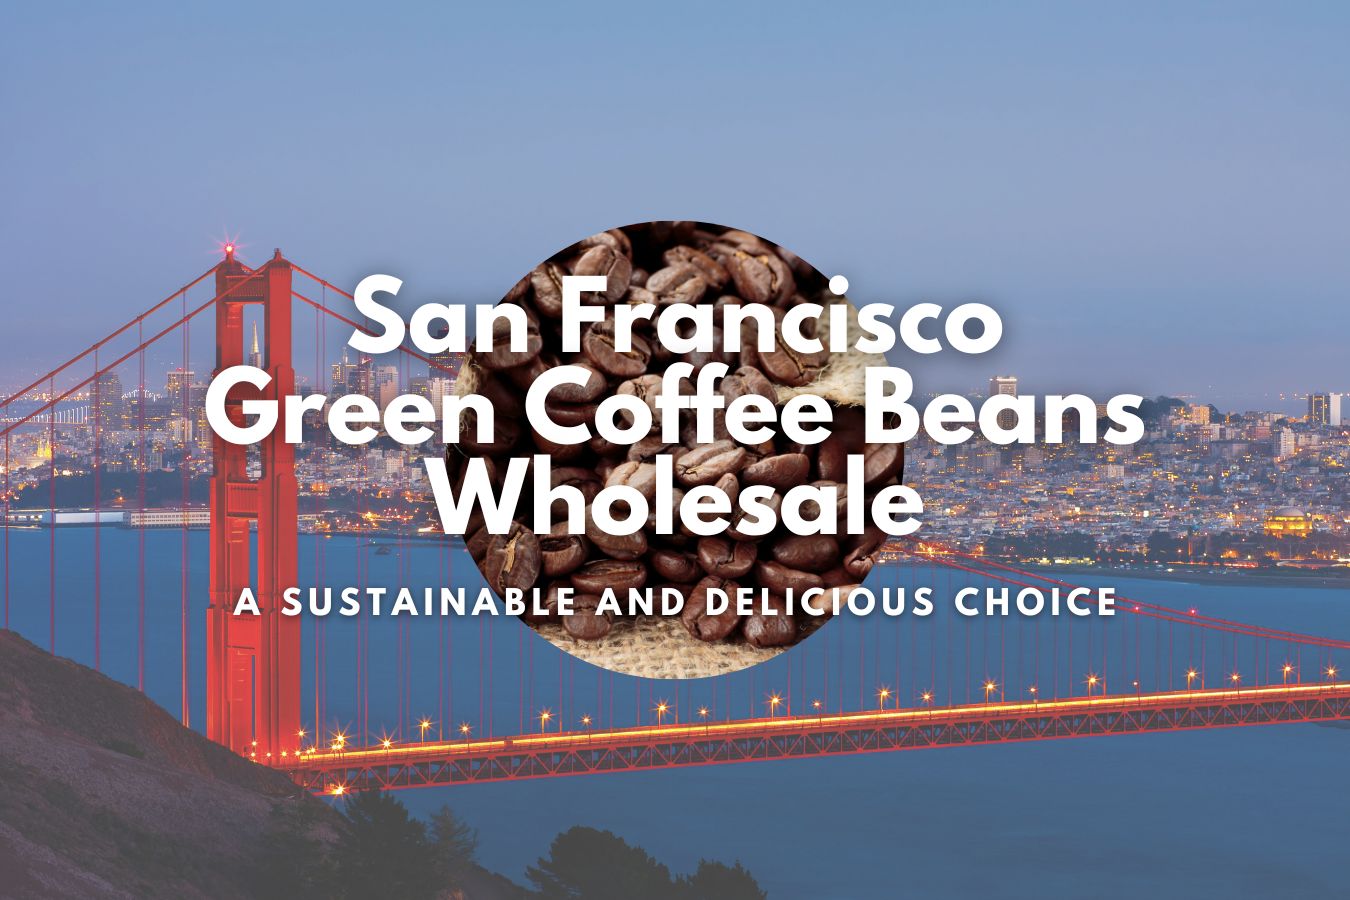 San Francisco Green Coffee Beans Wholesale: A Sustainable and Delicious Choice